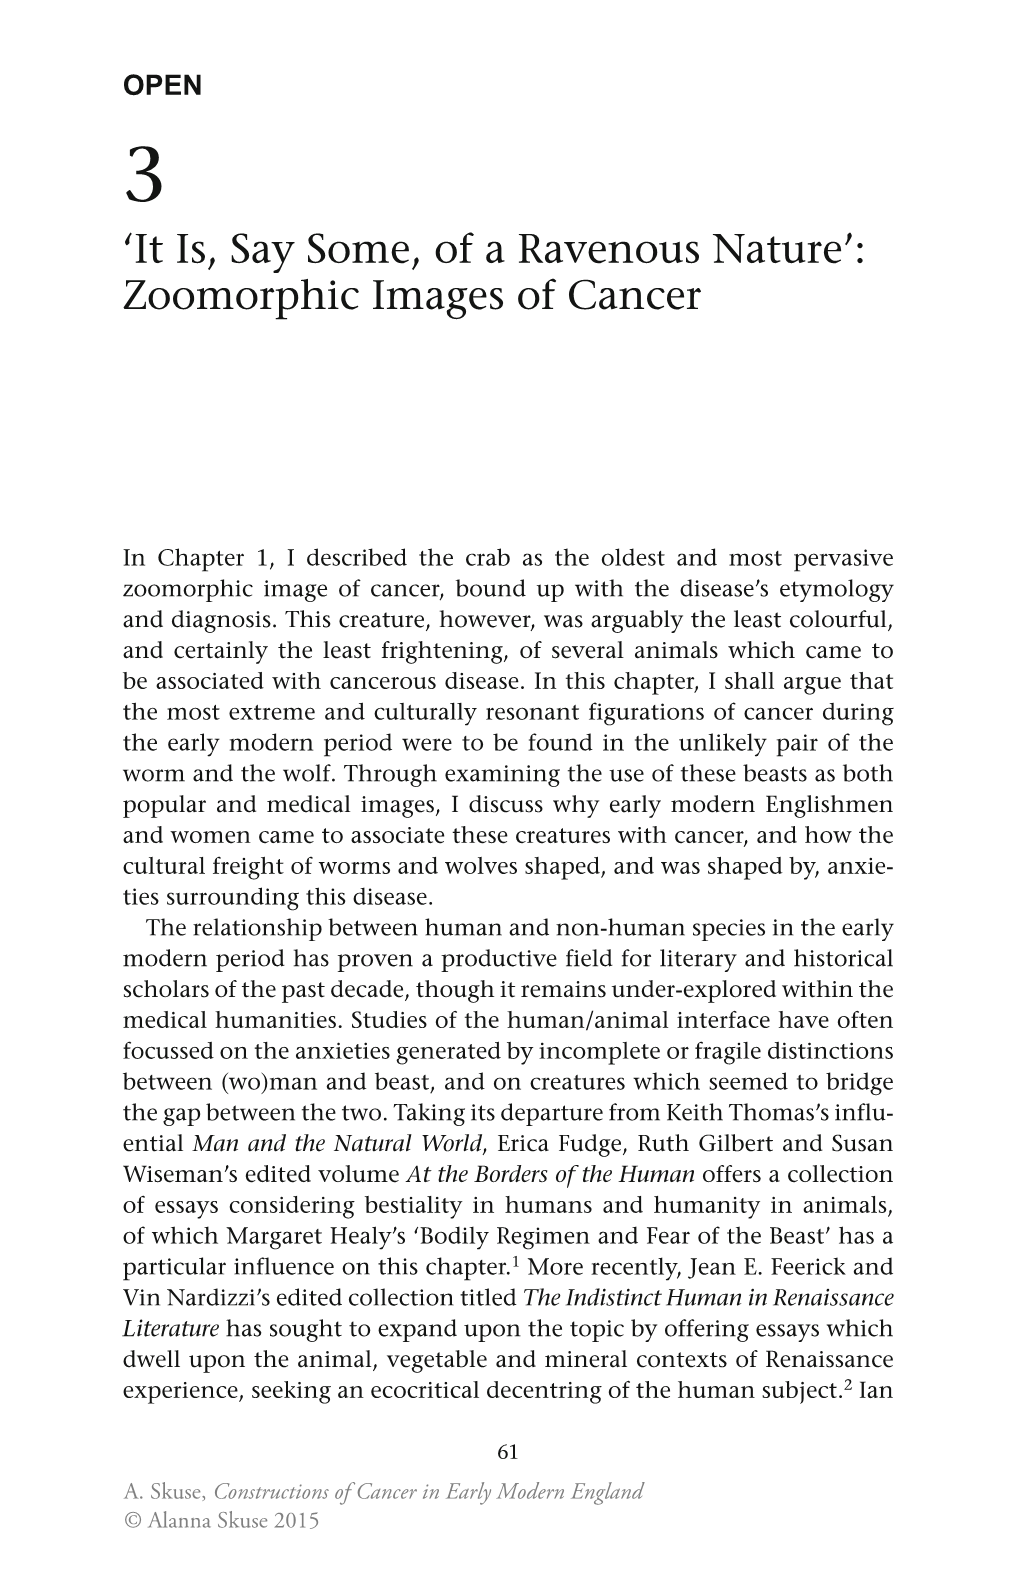 'It Is, Say Some, of a Ravenous Nature': Zoomorphic Images of Cancer